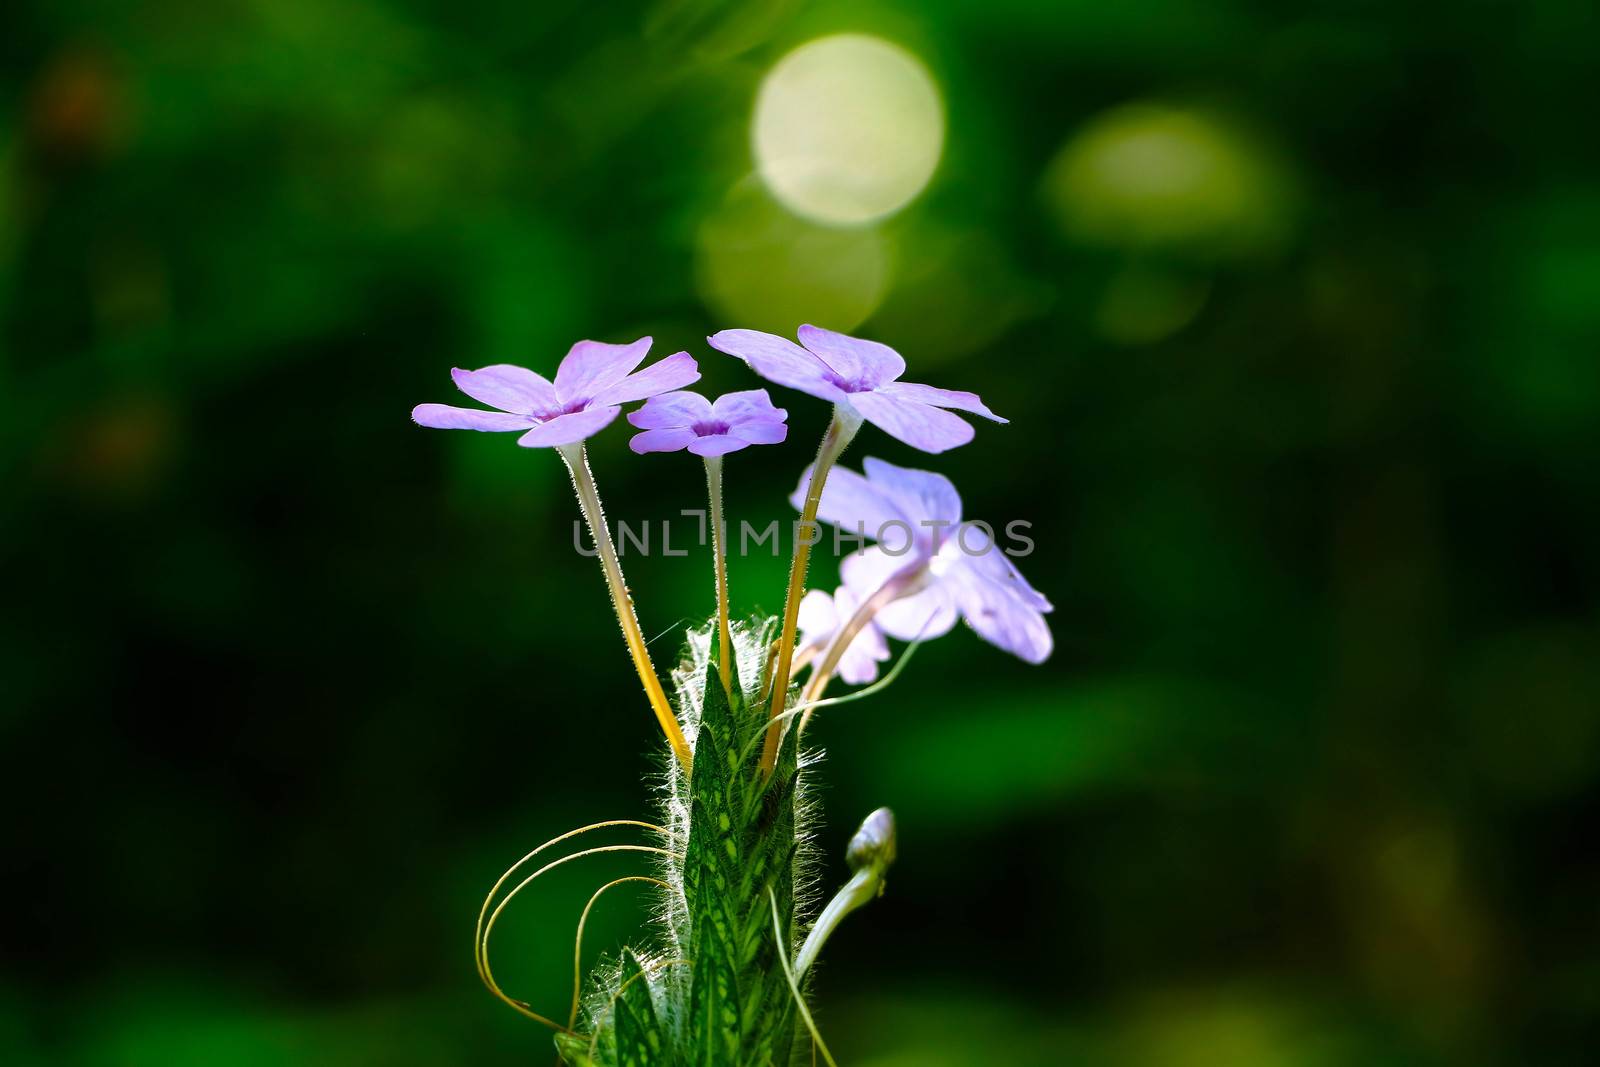 The Small violet flowers with the green nature,close up